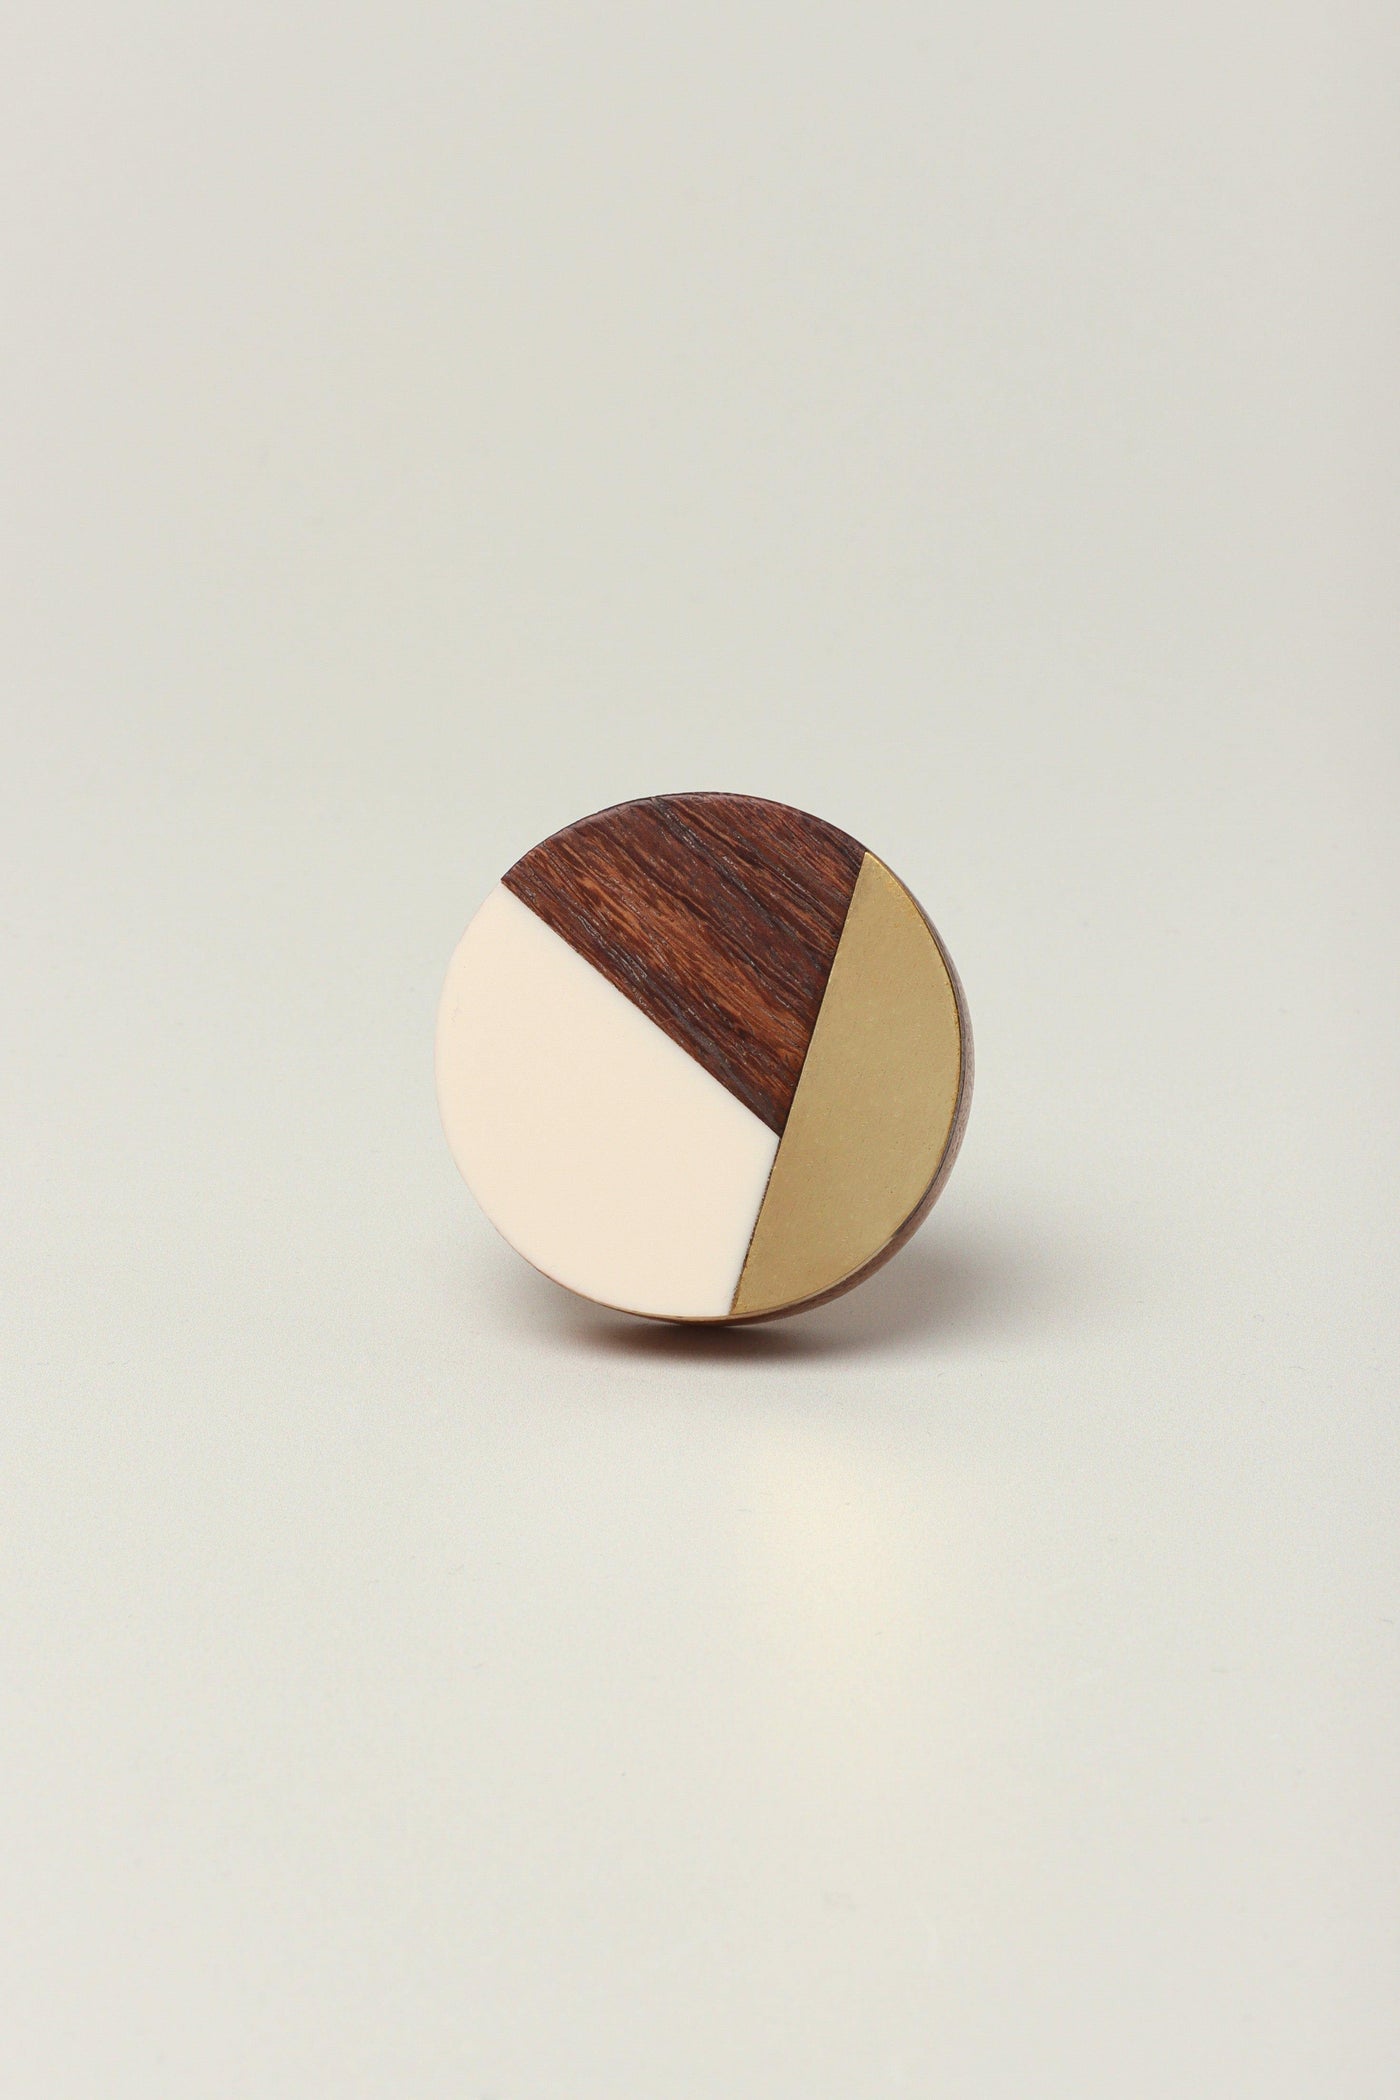 G Decor White Three Tone Wood, Resin And Gold Handles And Knobs